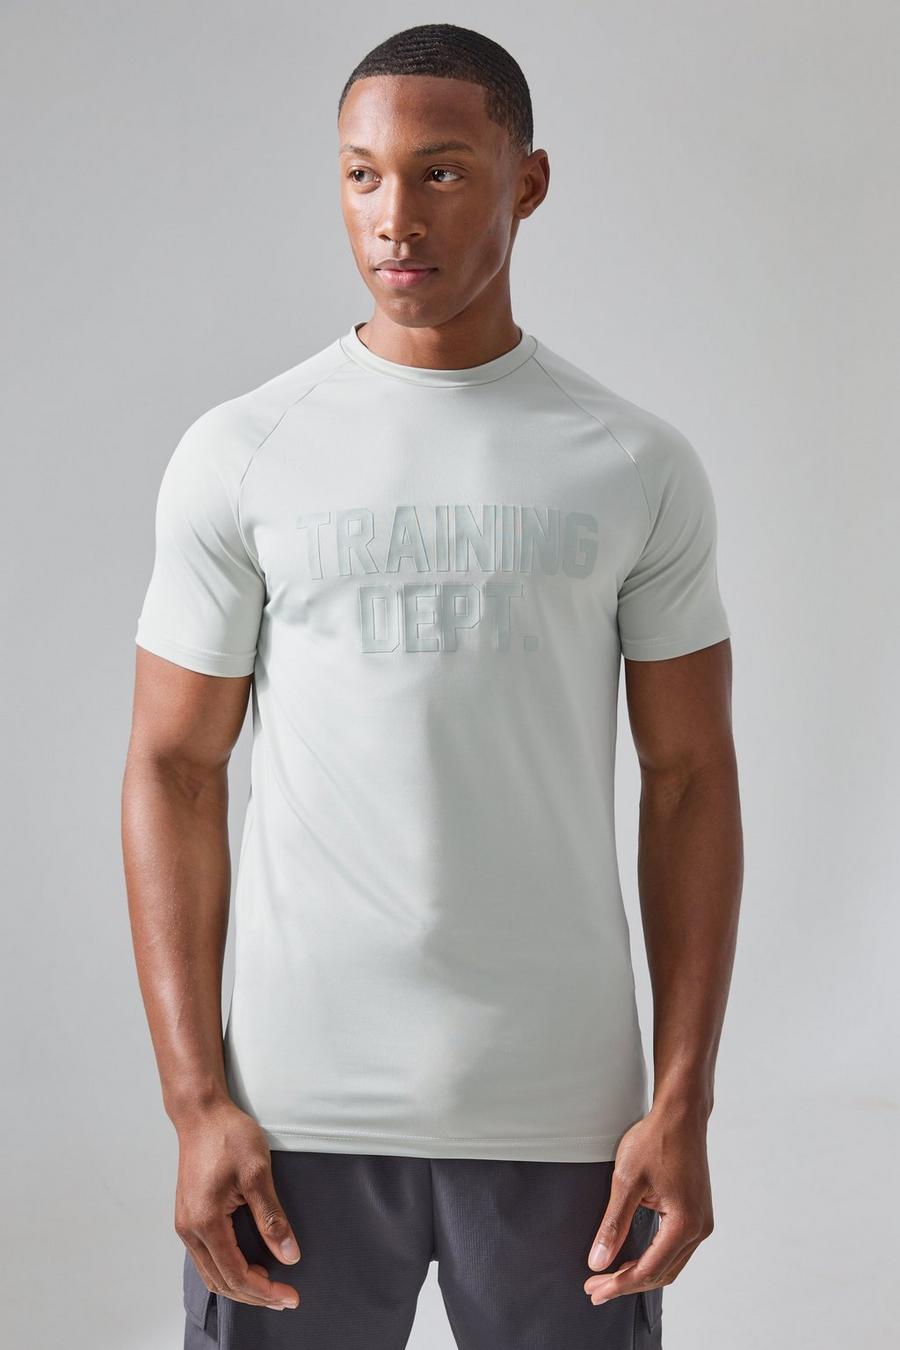 Active Trainings Dept Muscle-Fit T-Shirt, Stone